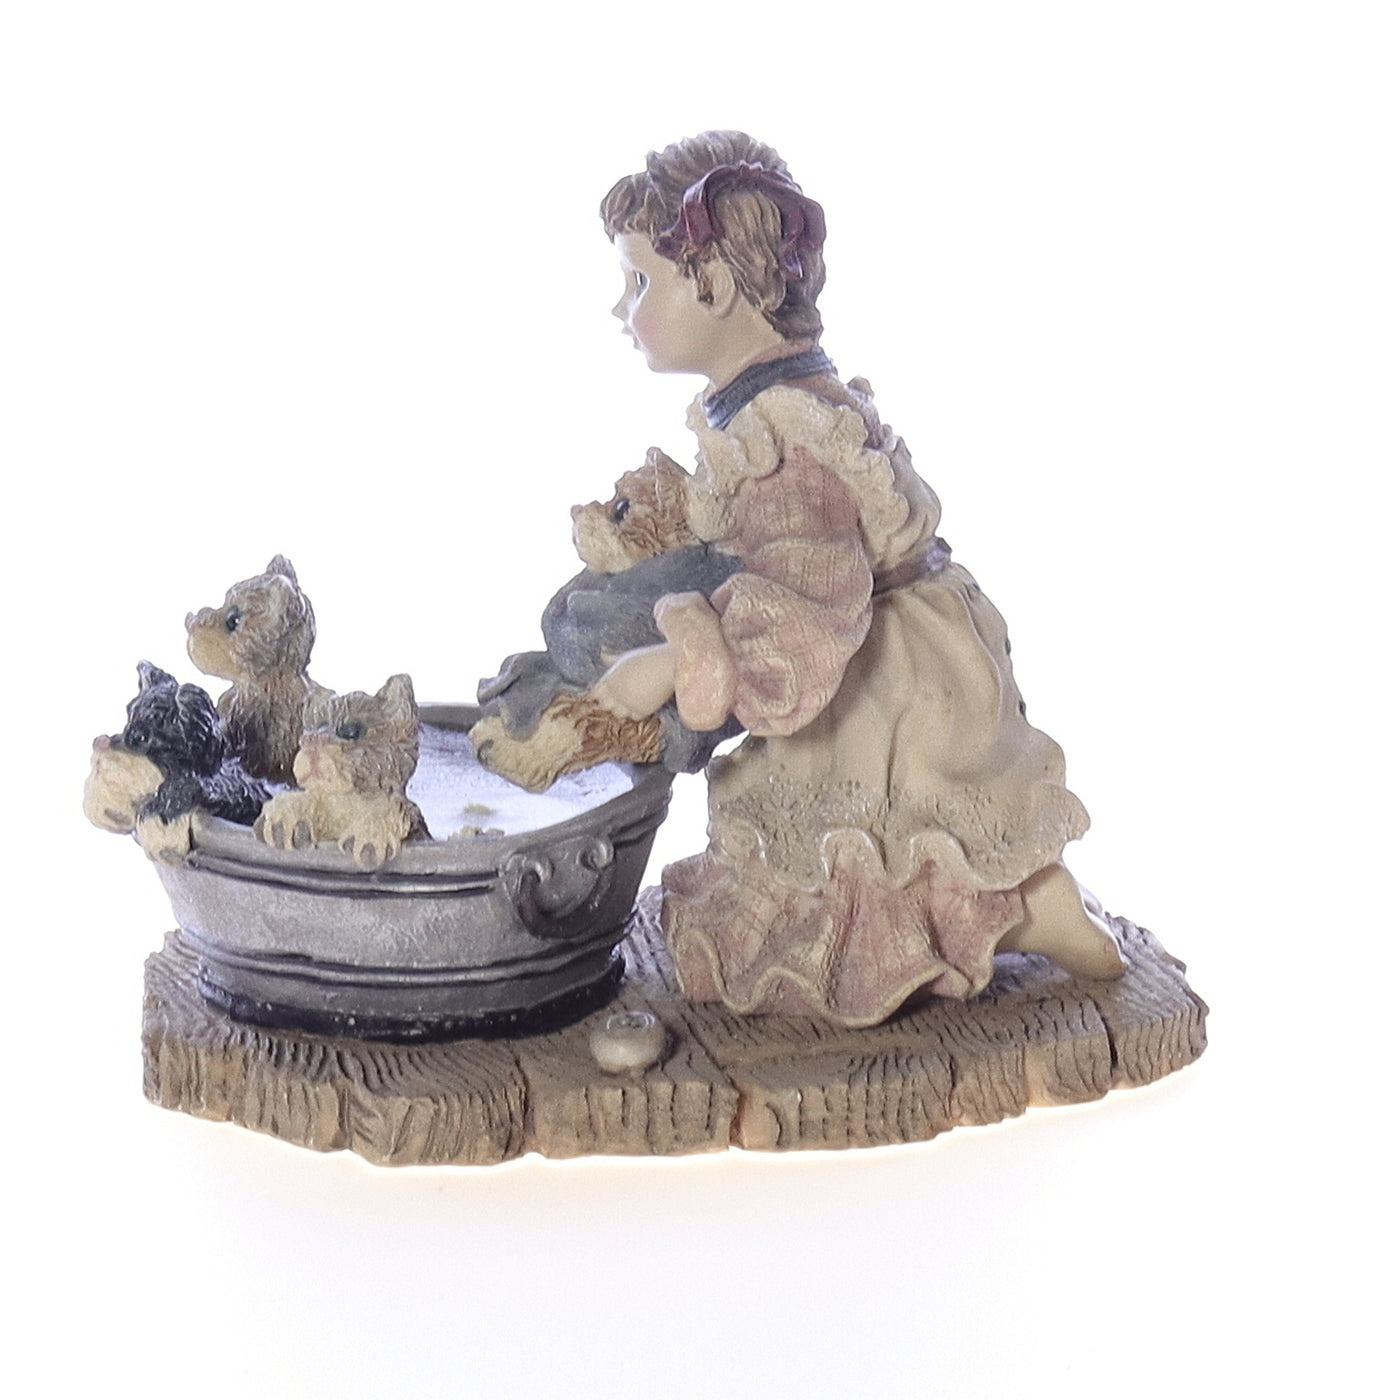 The_Dollstone_Collection_3521_Wendy_with_Bronte_Keats_Tennyson_and_Poe_Wash_Day_Cat_Figurine_1997 Back View